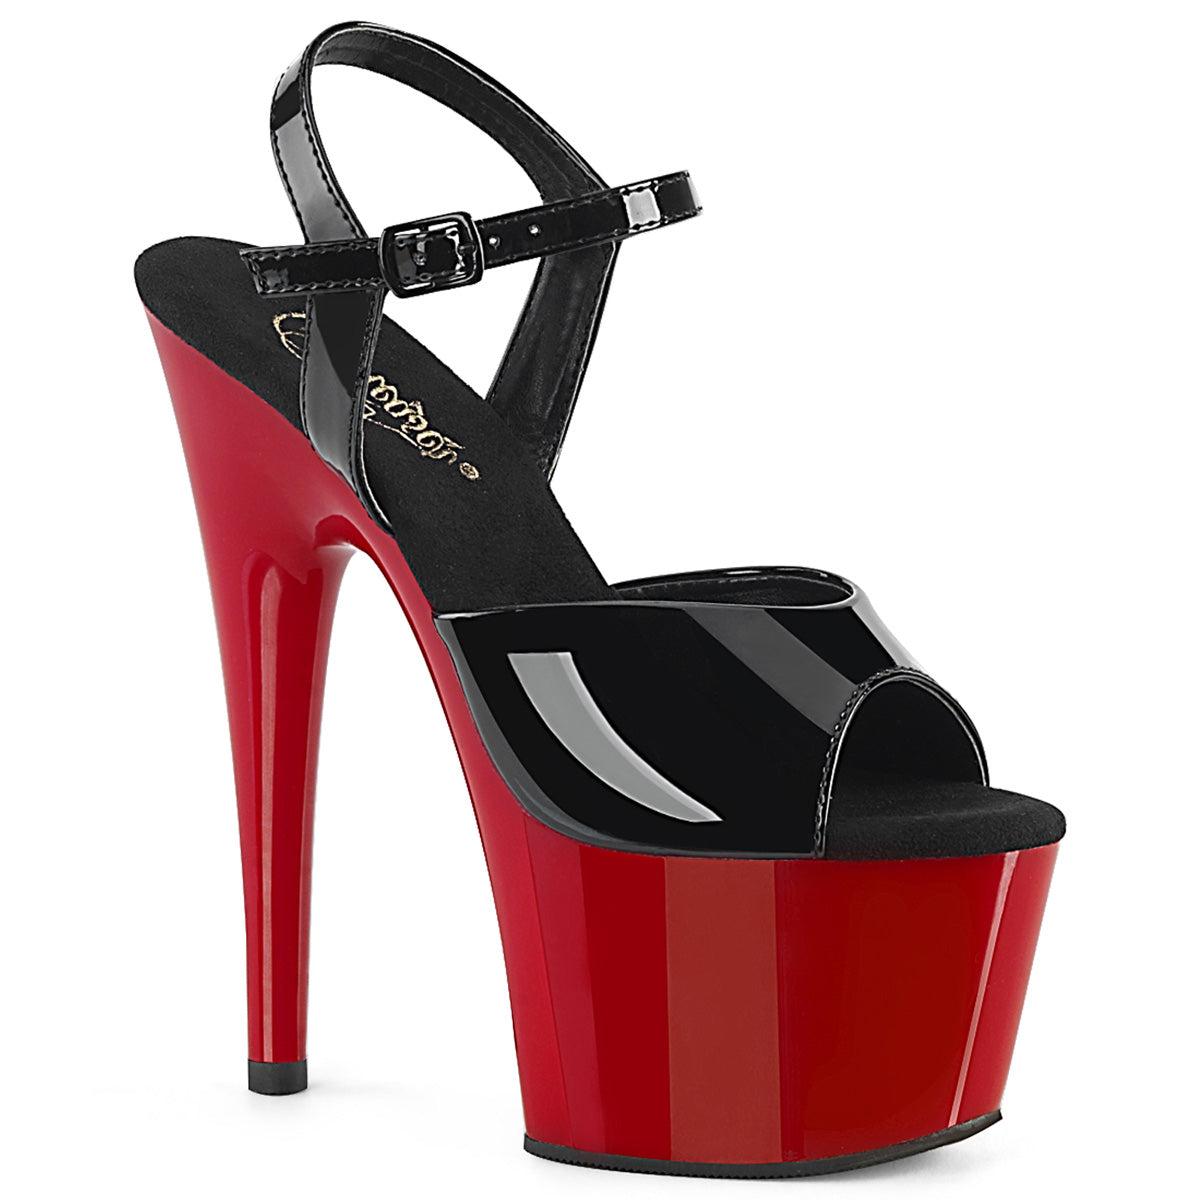 ADORE-709 Blk Pat/Red